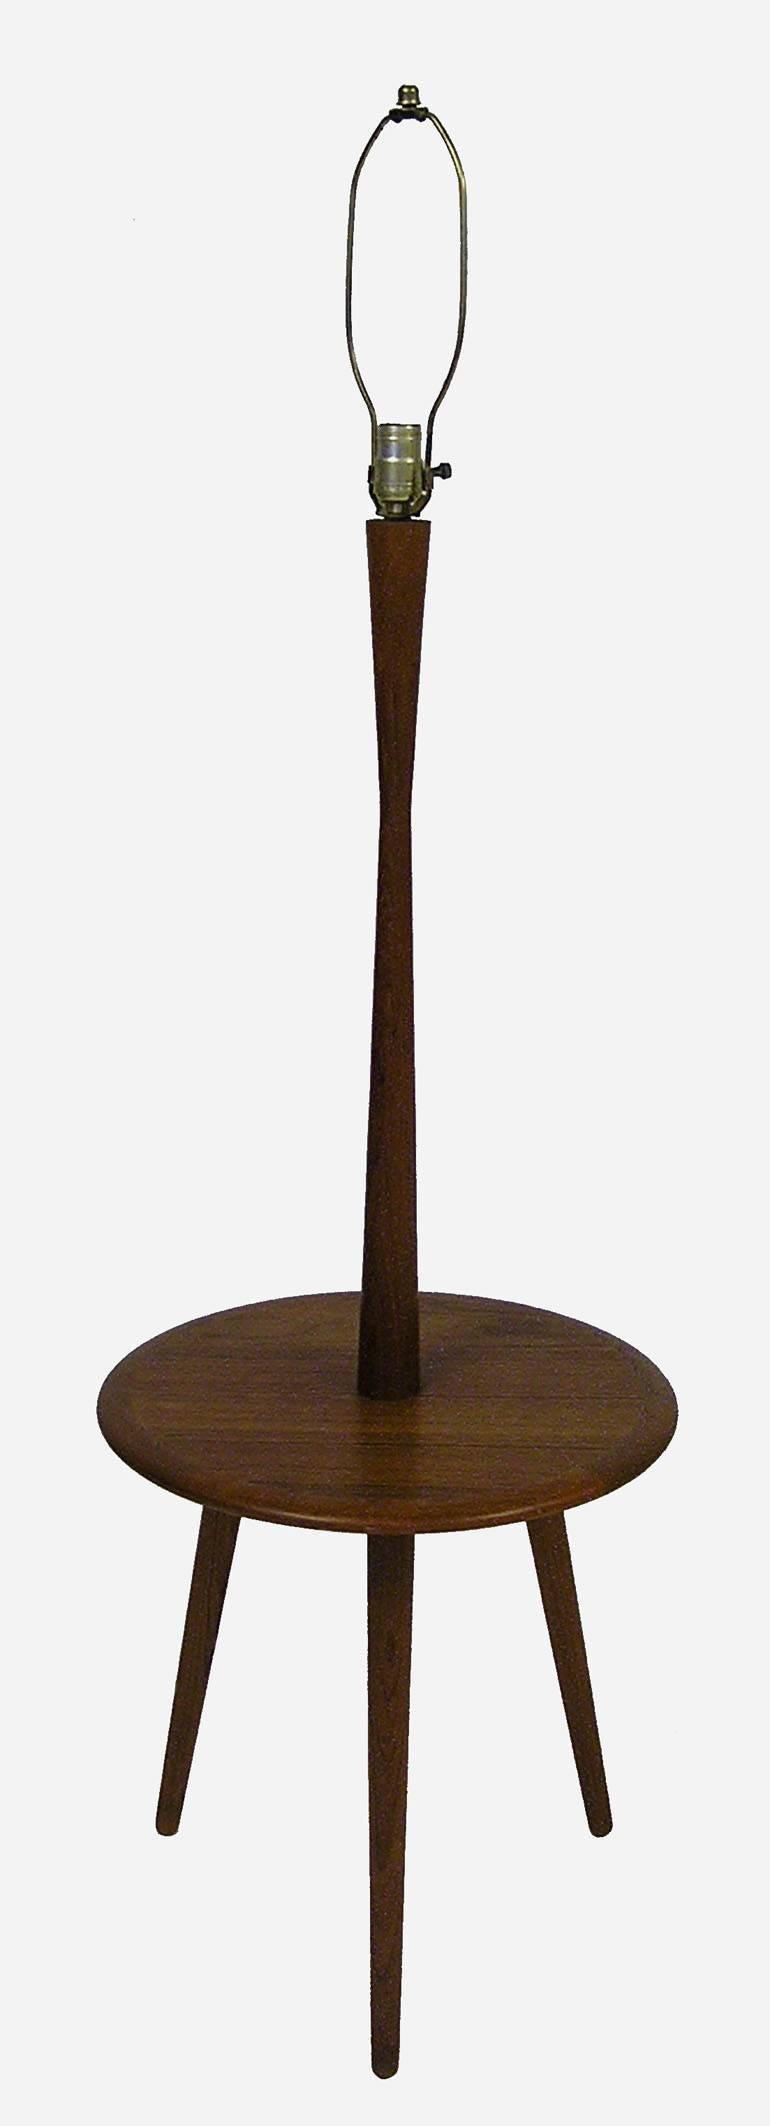 A stylish tripod-leg teak floor lamp with attached elliptical table from the 1960s. Gorgeous Danish modern inspired lines featuring tapered conical legs and fitted with a three-way fixture. Shade shown in last picture is not the original and is not